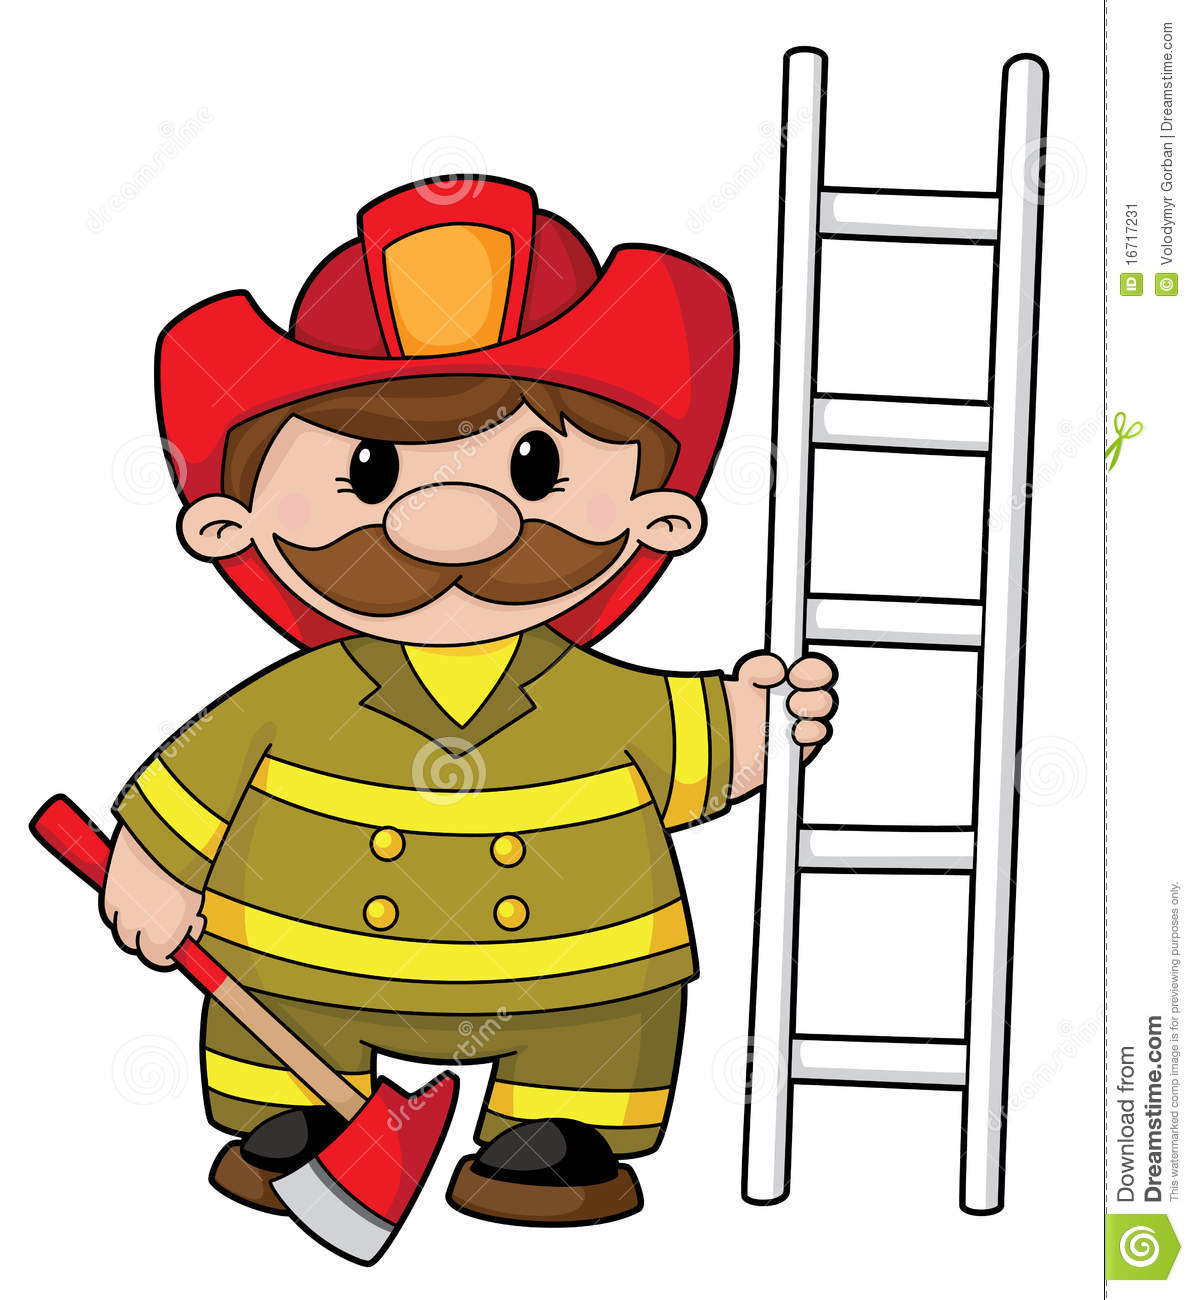 Illustration Of A Firefighter With The Equipment